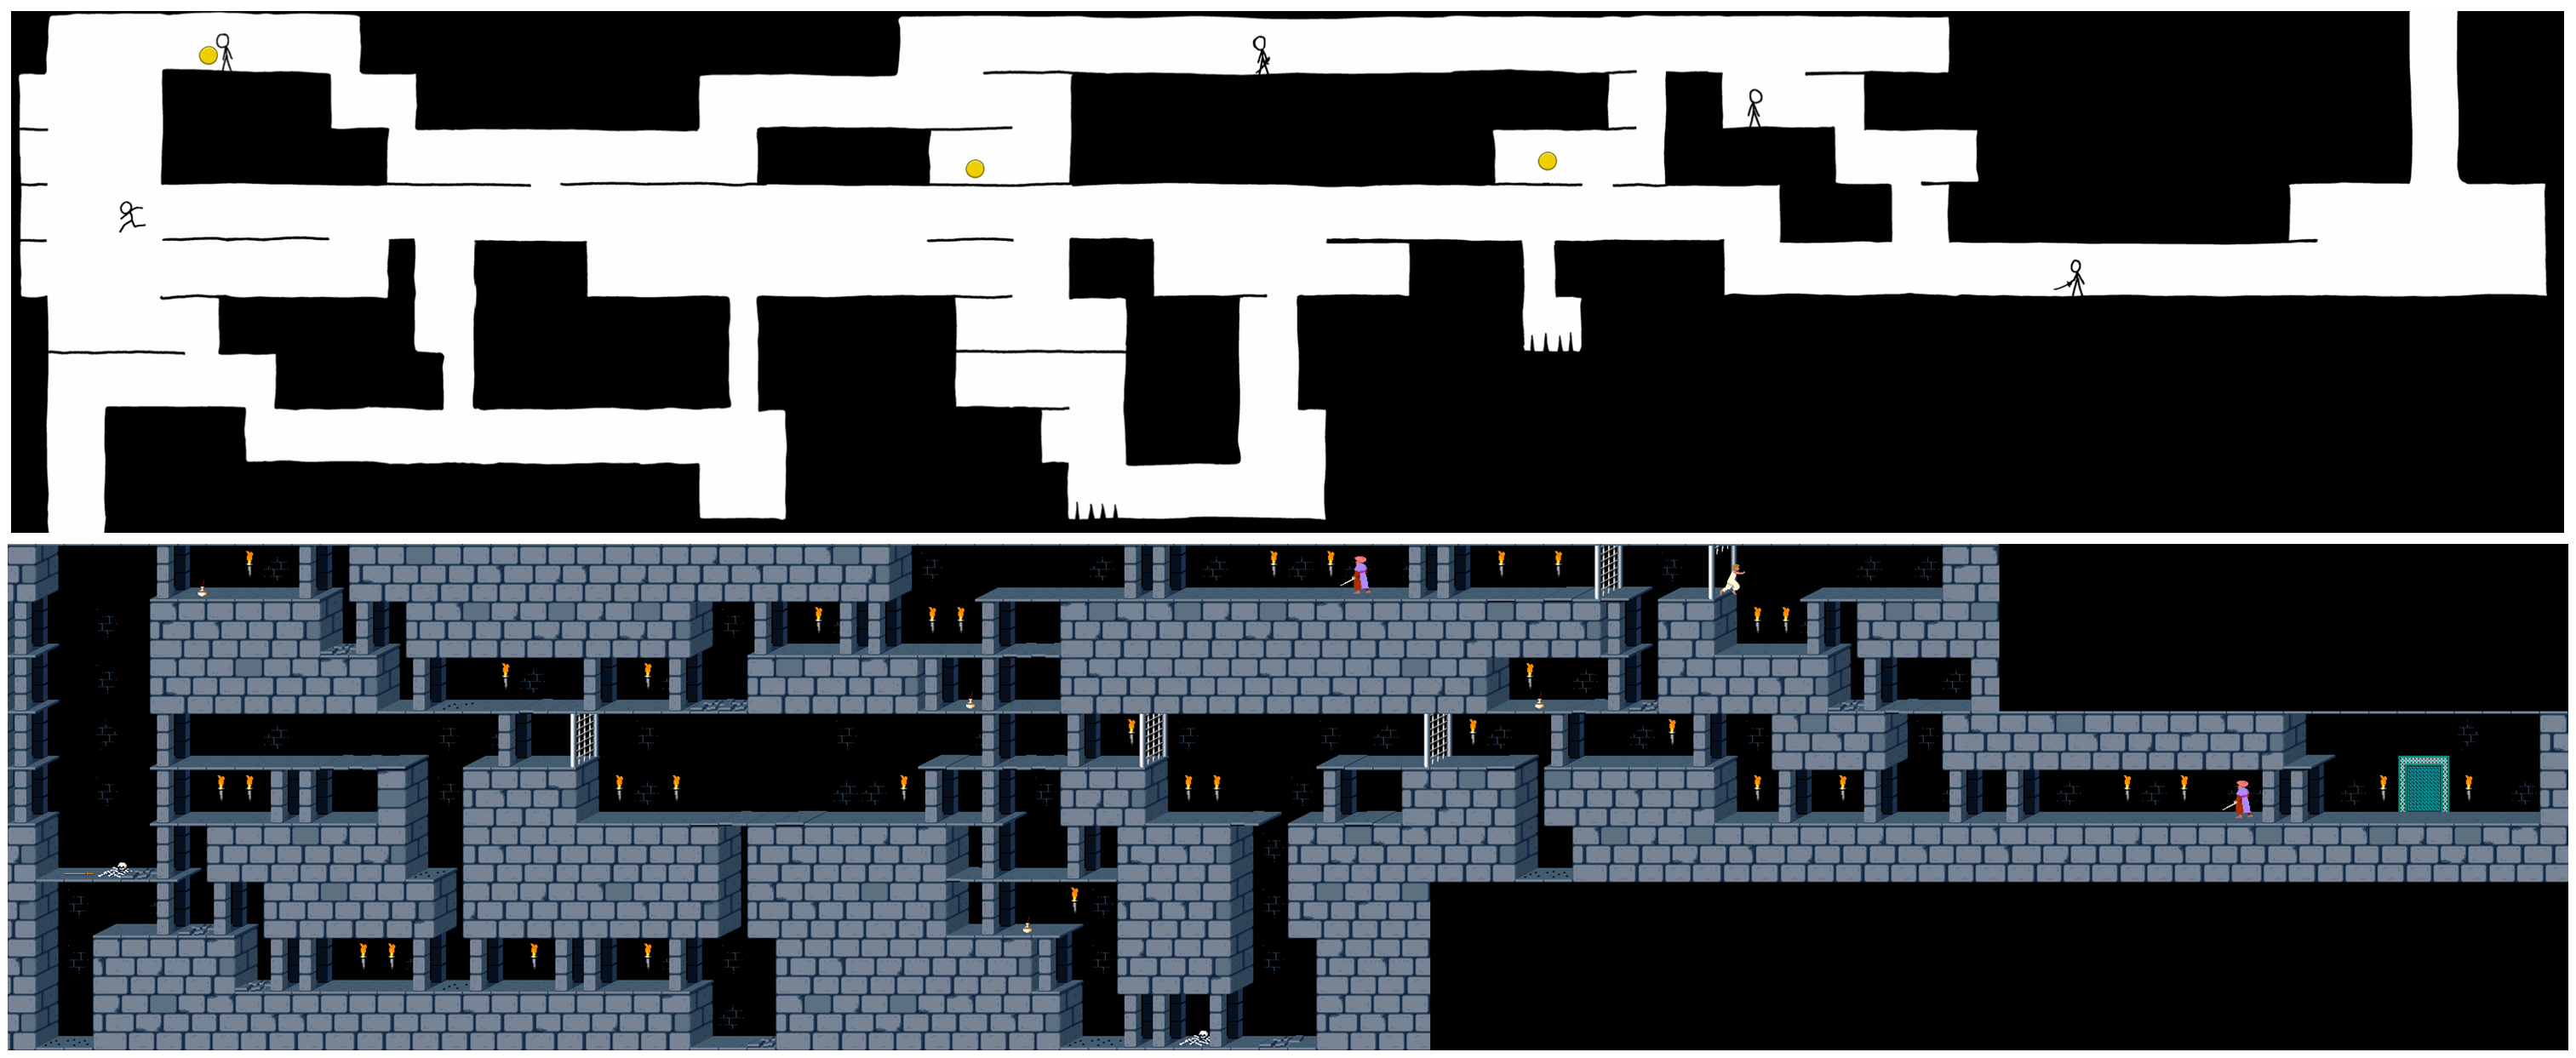 1608 Comparing Prince of Persia maze with real level 1.png